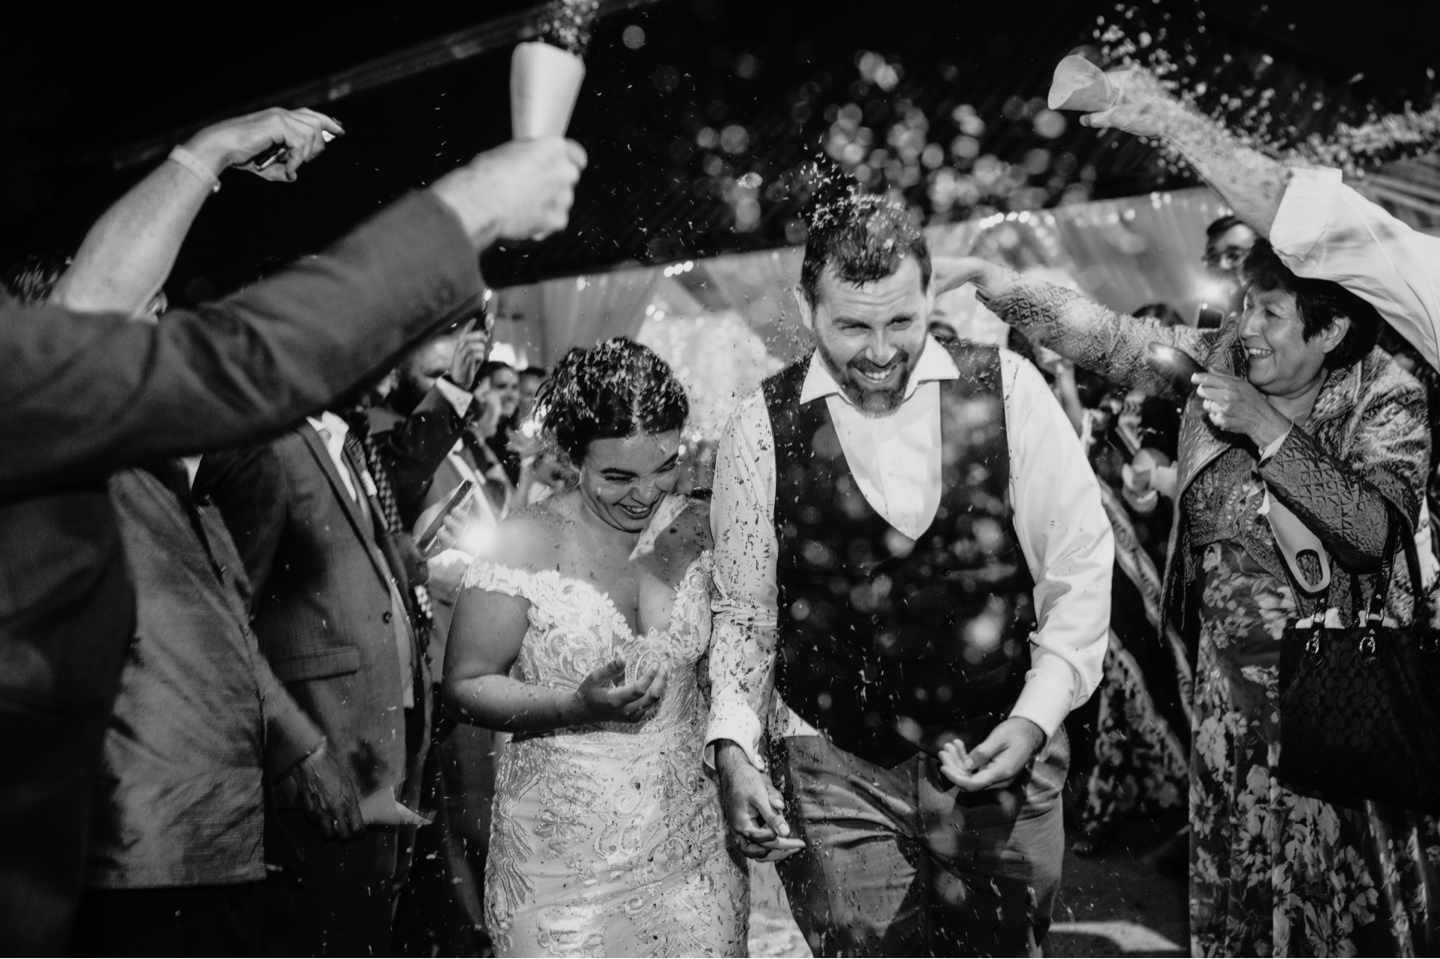 Bride and groom leave their Yosemite wedding reception under a shower of Champagne